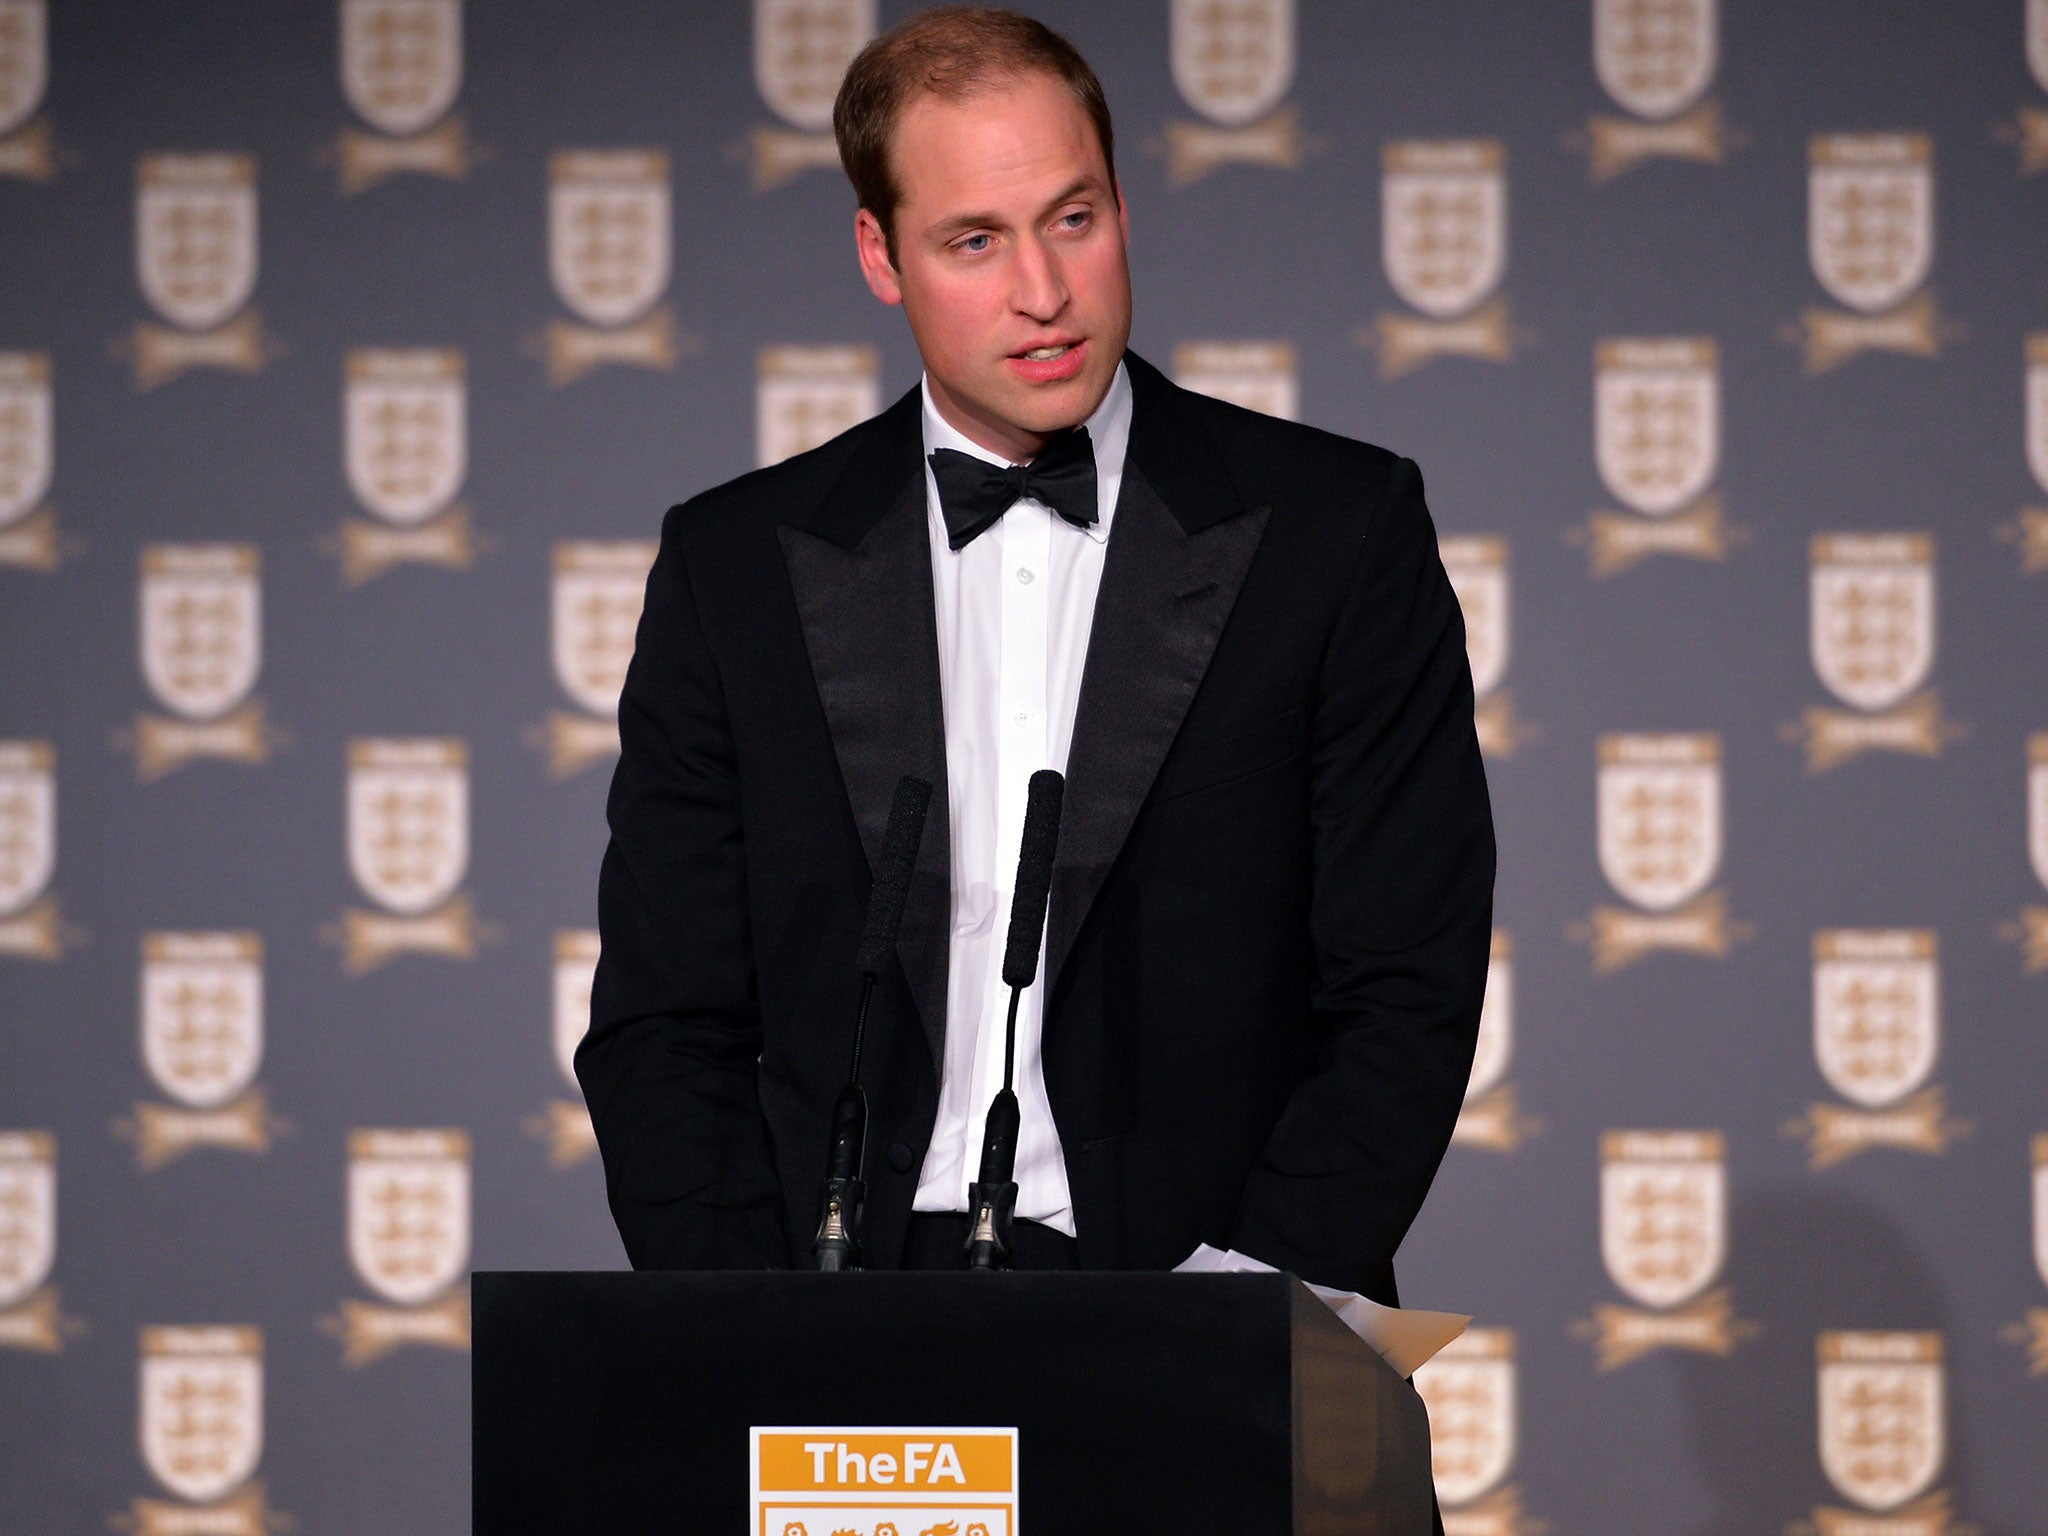 Prince William, Duke of Cambridge gives a speech during The Football Association's 150th Anniversary Gala Dinner at the Grand Connaught Rooms on October 26, 2013